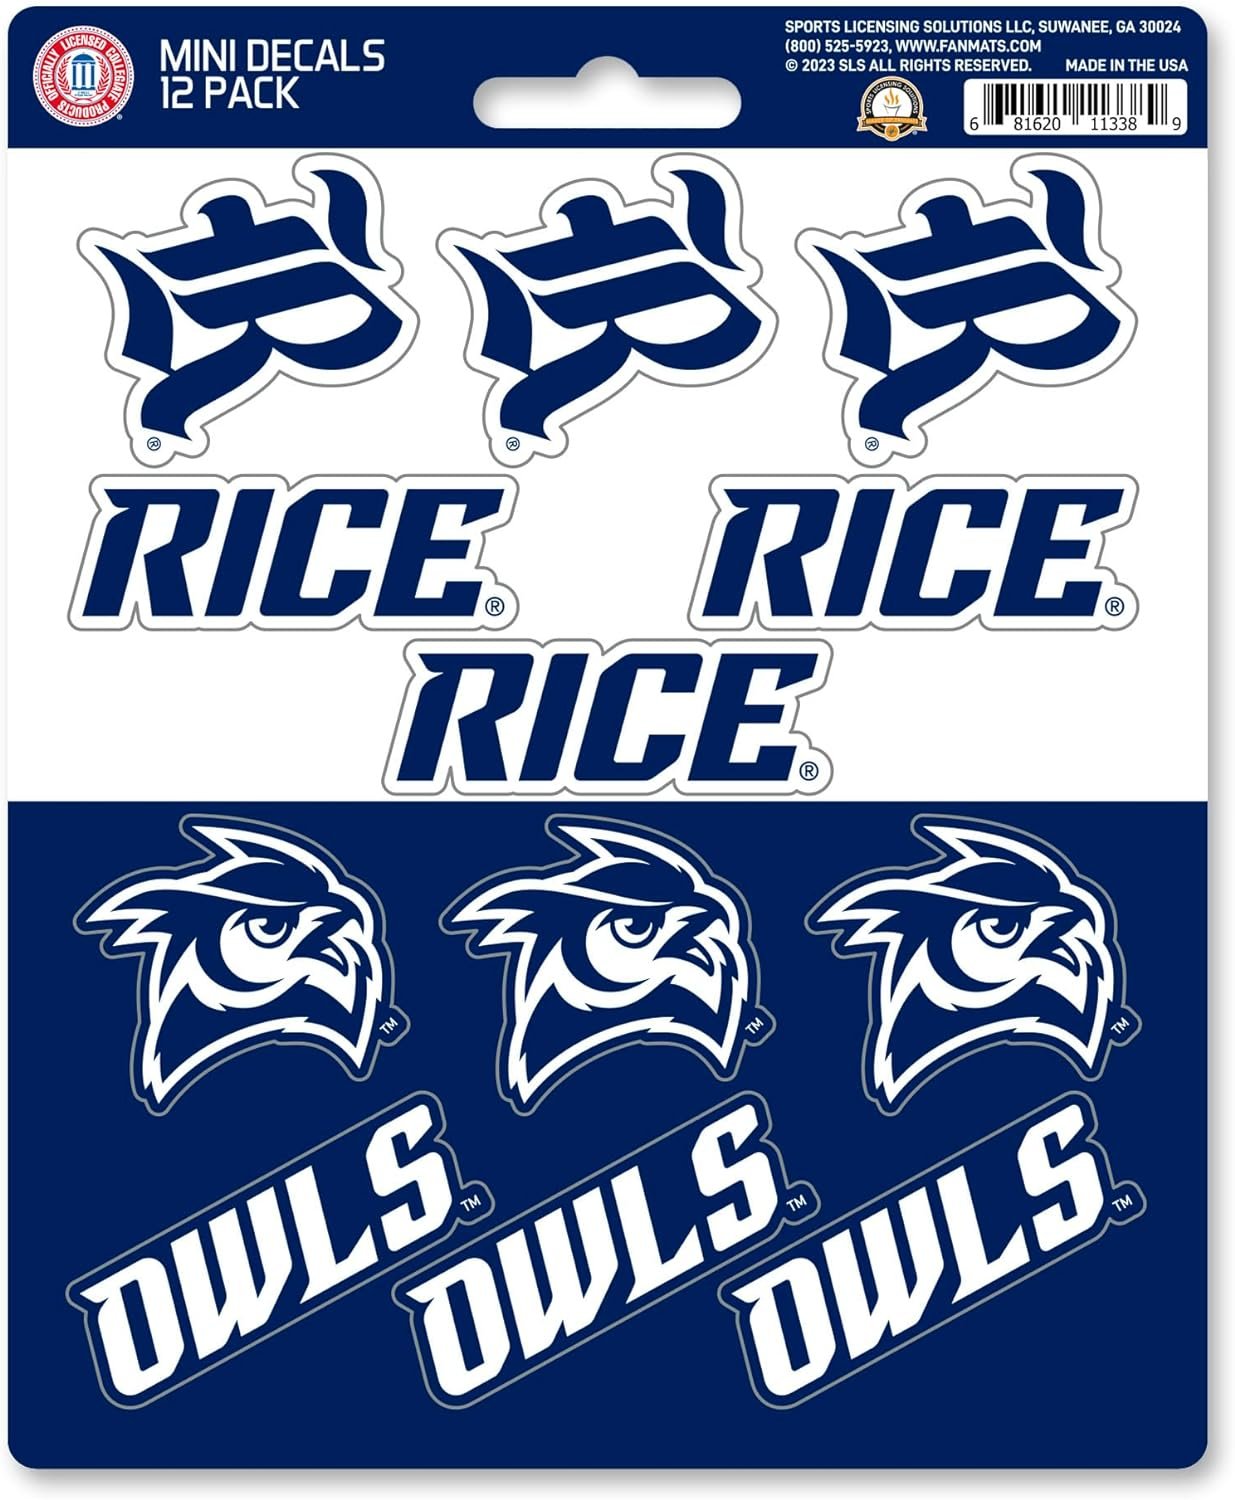 Rice University Owls 12-Piece Mini Decal Sticker Set, 5x6 Inch Sheet, Gift for football fans for any hard surfaces around home, automotive, personal items